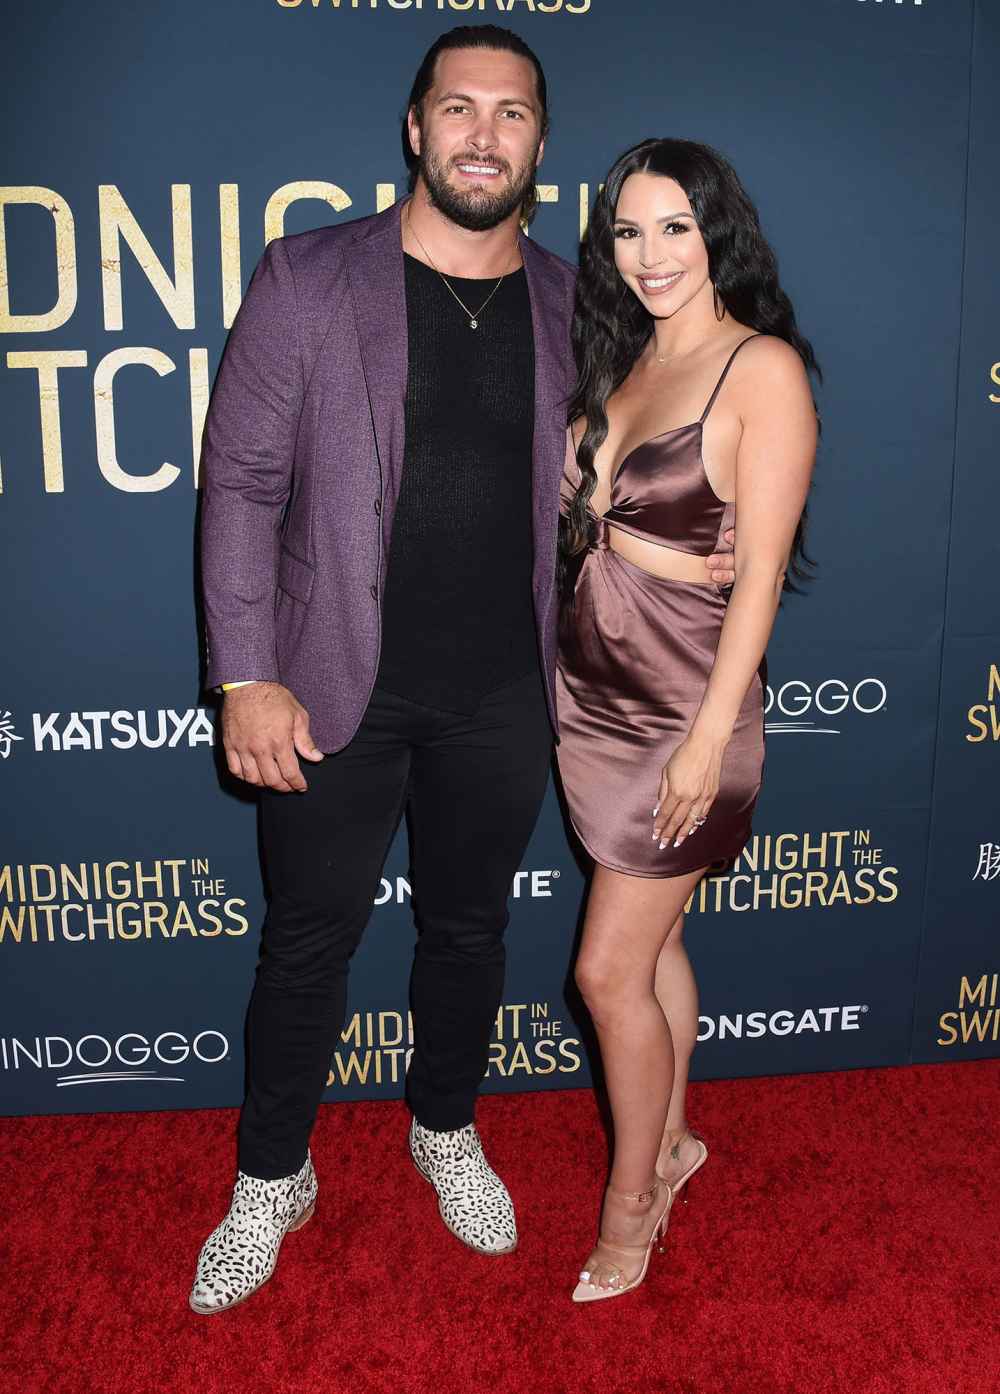 Scheana Shay and Brock Davies Are 'Considering' Surrogacy or Adoption for 2nd Baby